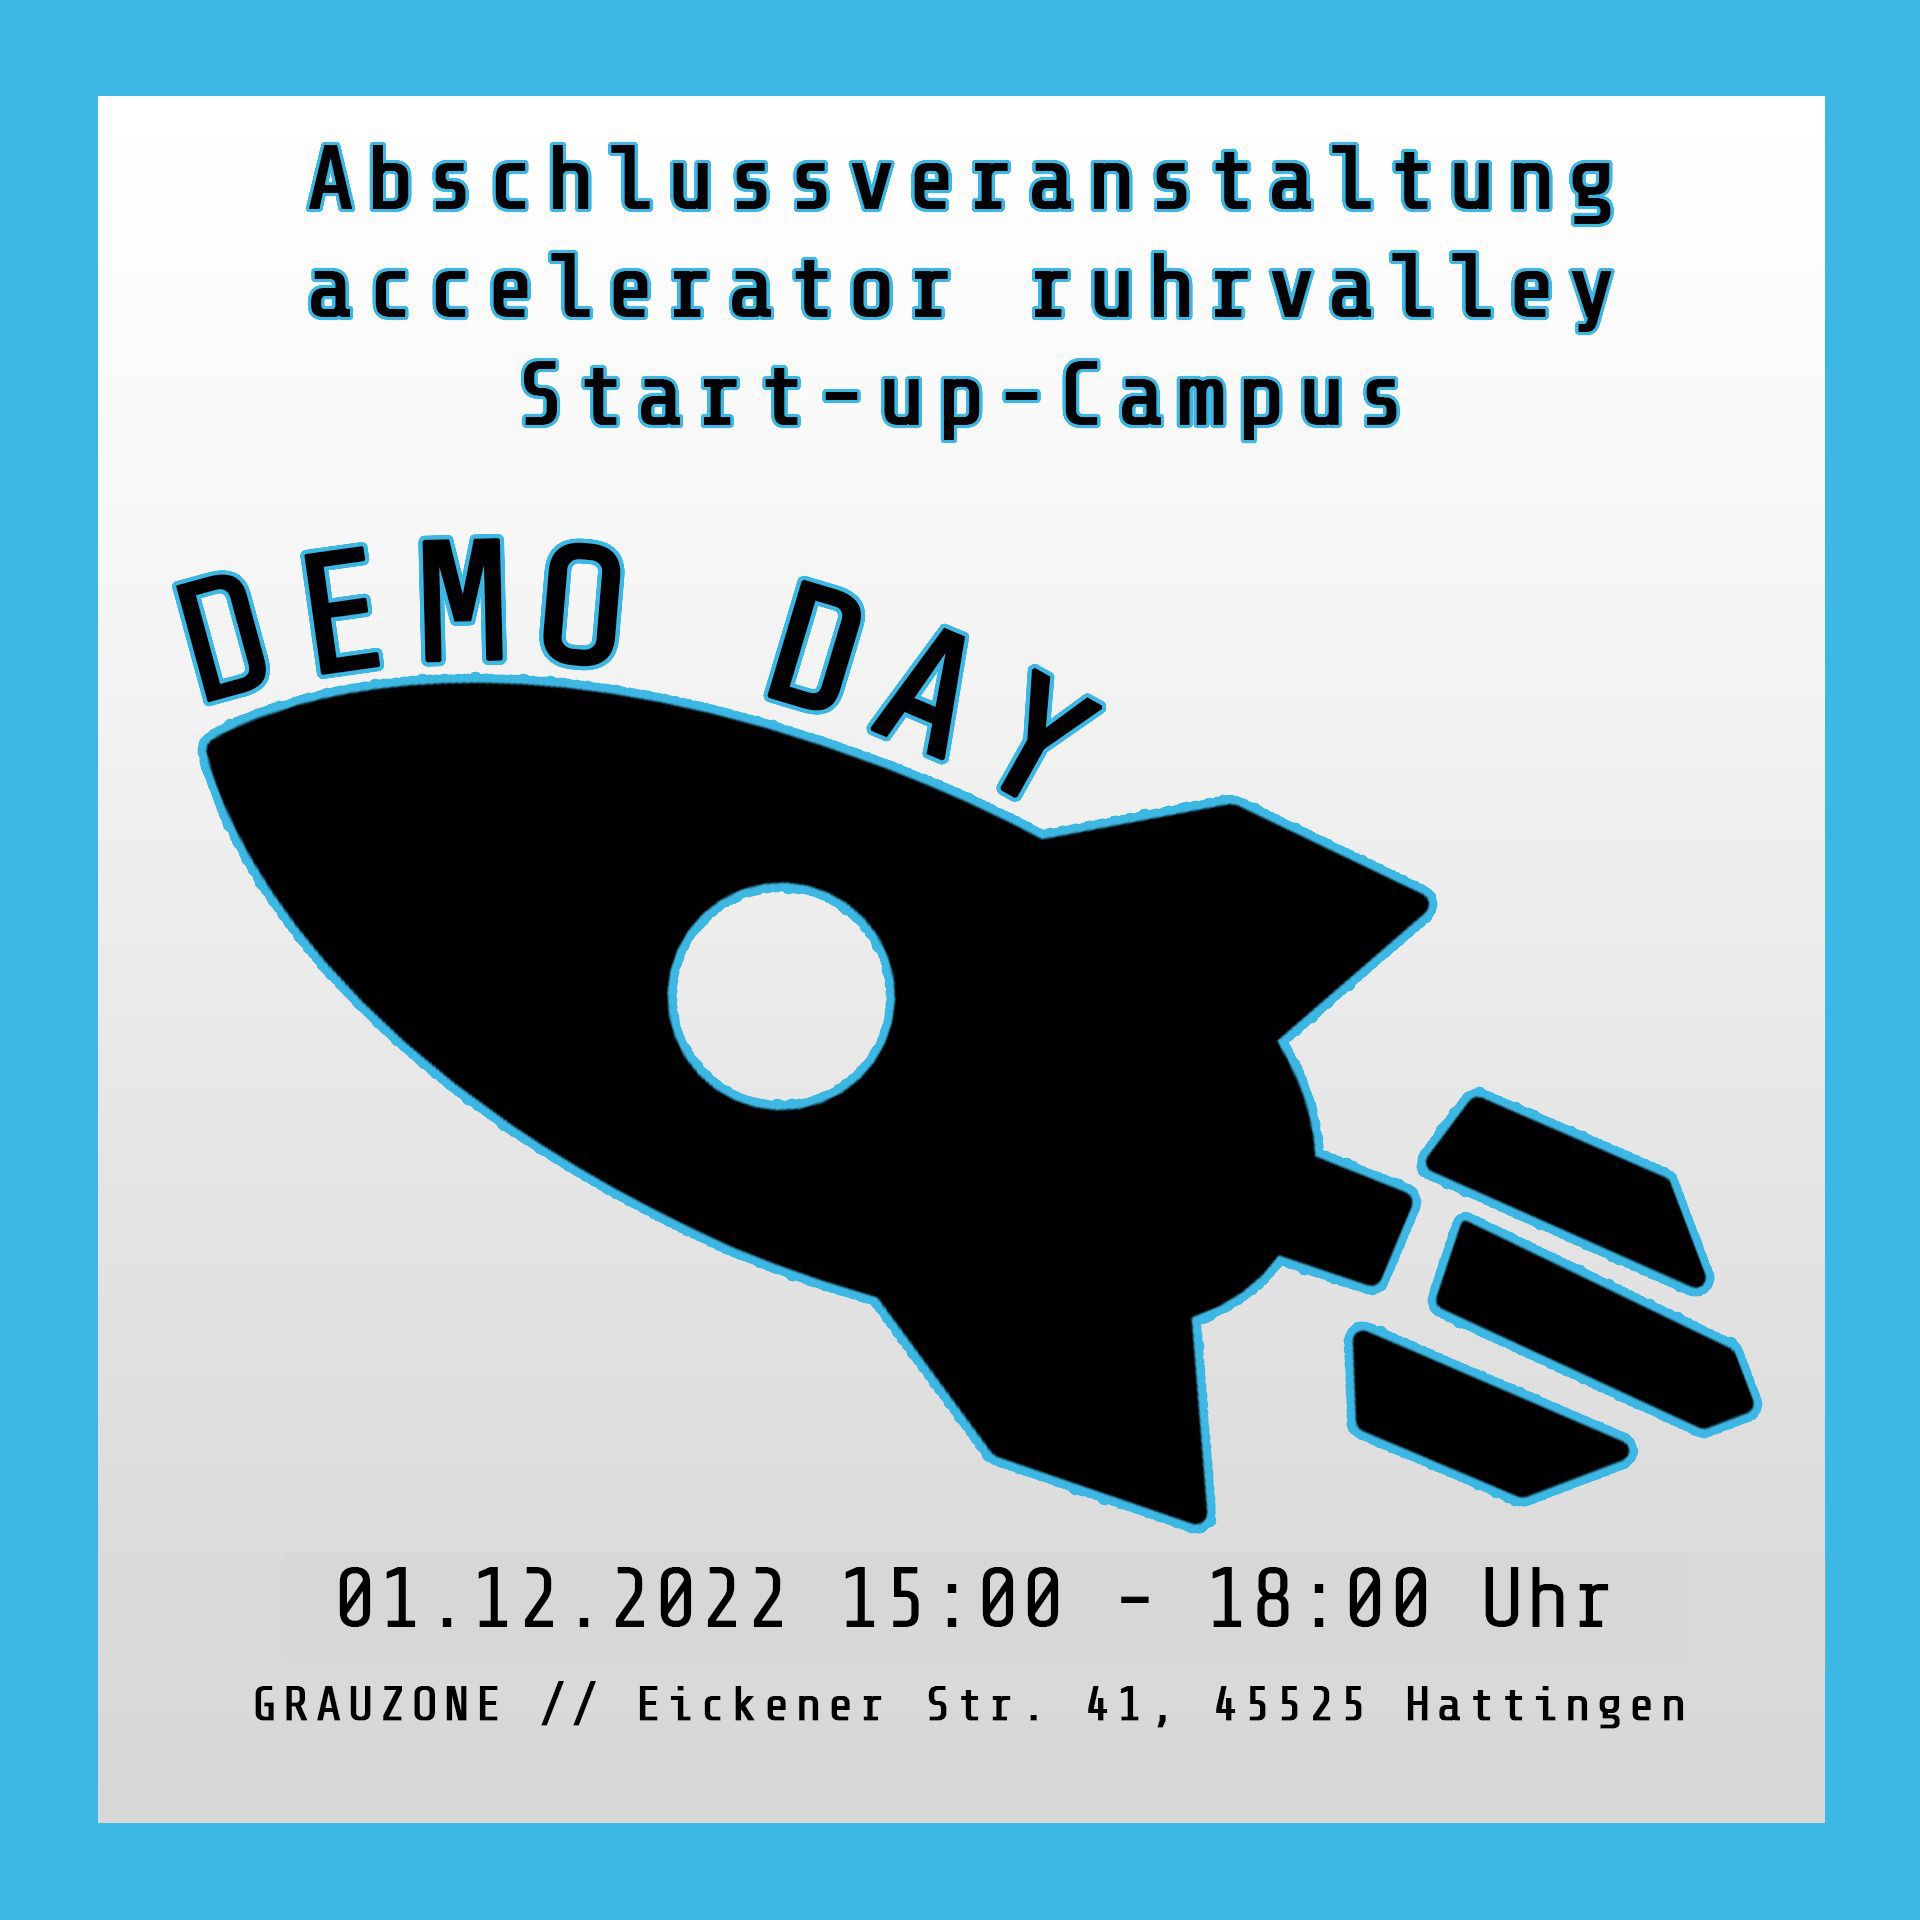 DEMO-Day accelerator Ruhrvalley Start-up-Campus